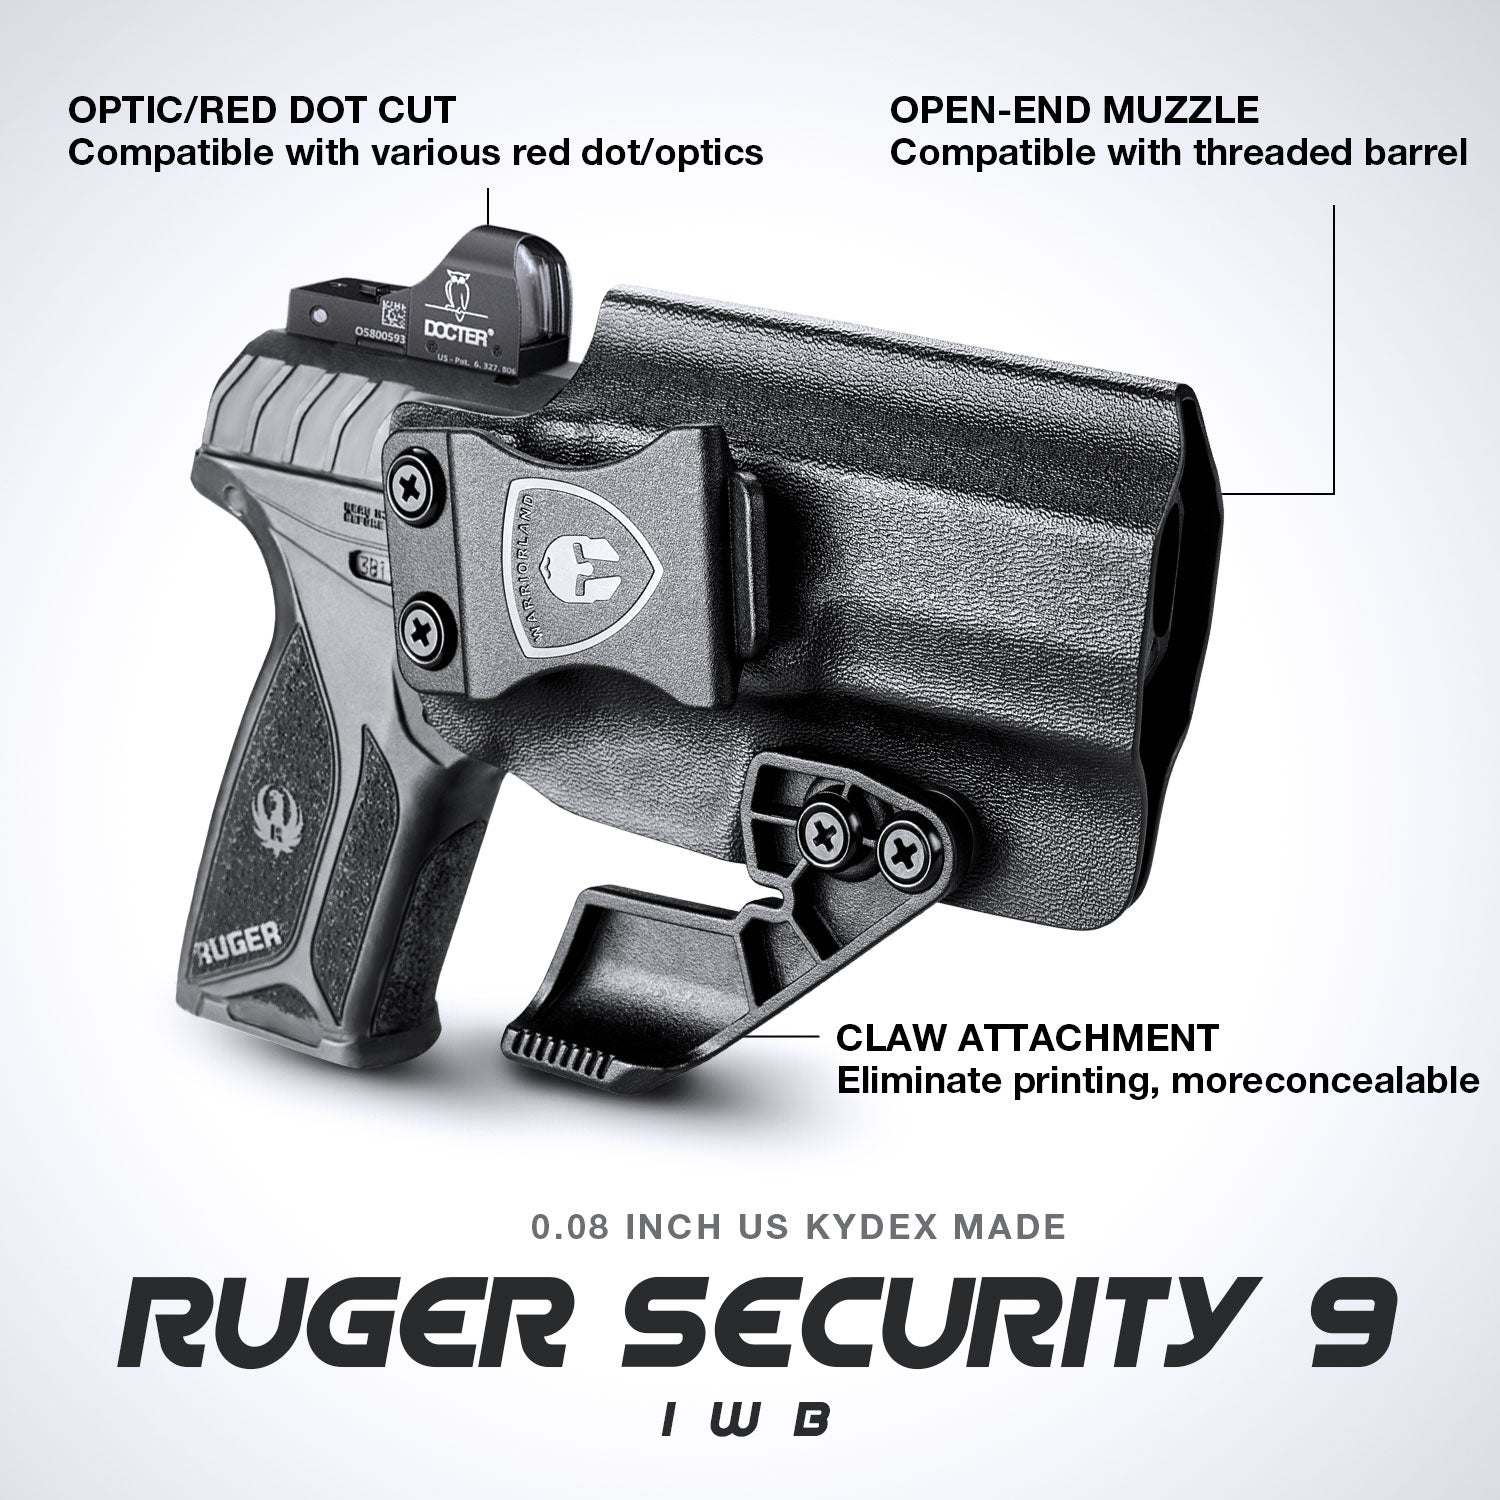 Ruger Security 9mm Compact  Inside Waistband Holster Concealed Carry with Claw holsters for Fat Guys | WARRIORLAND